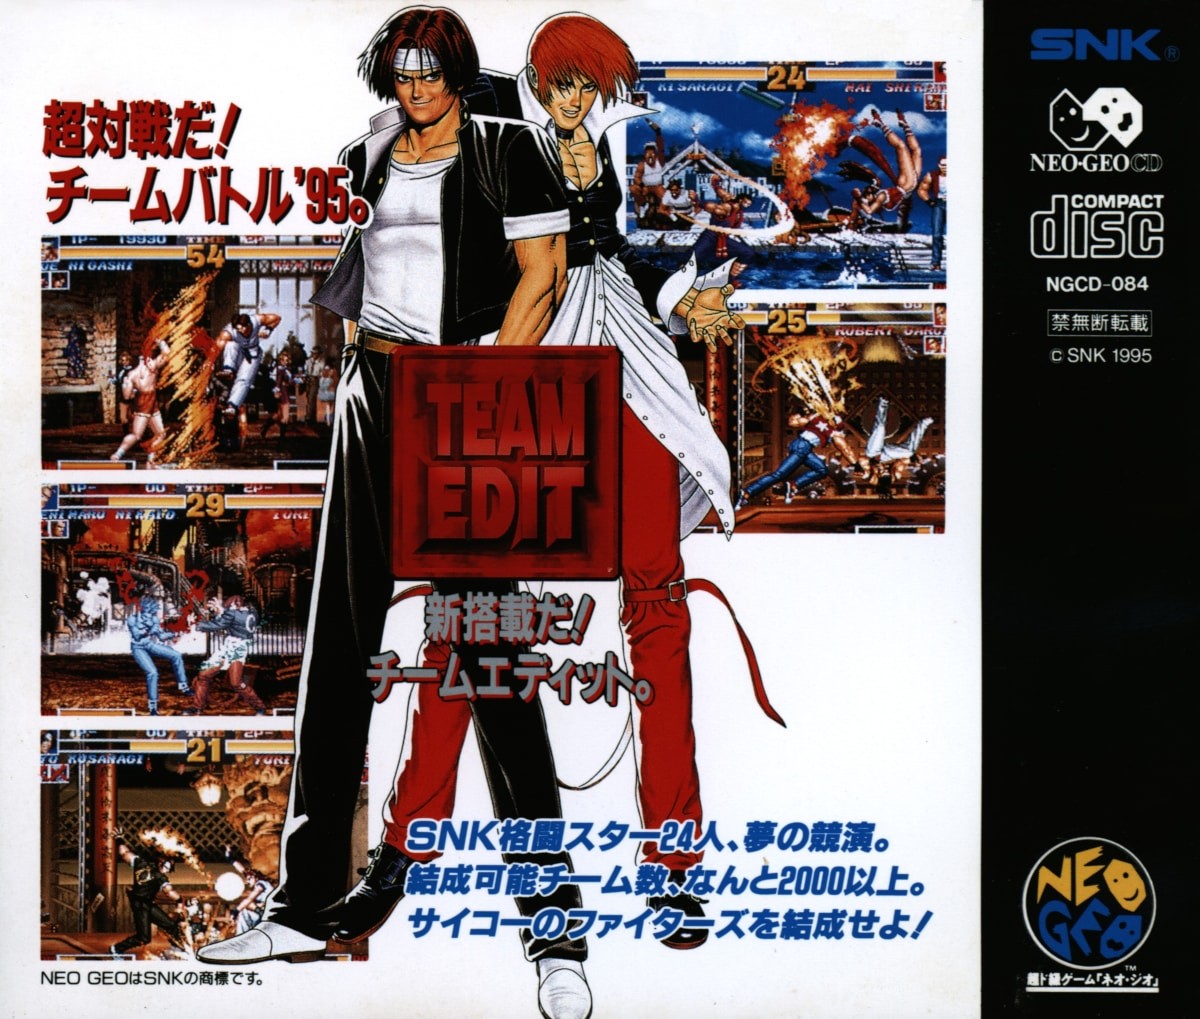 Capa do jogo The King of Fighters 95